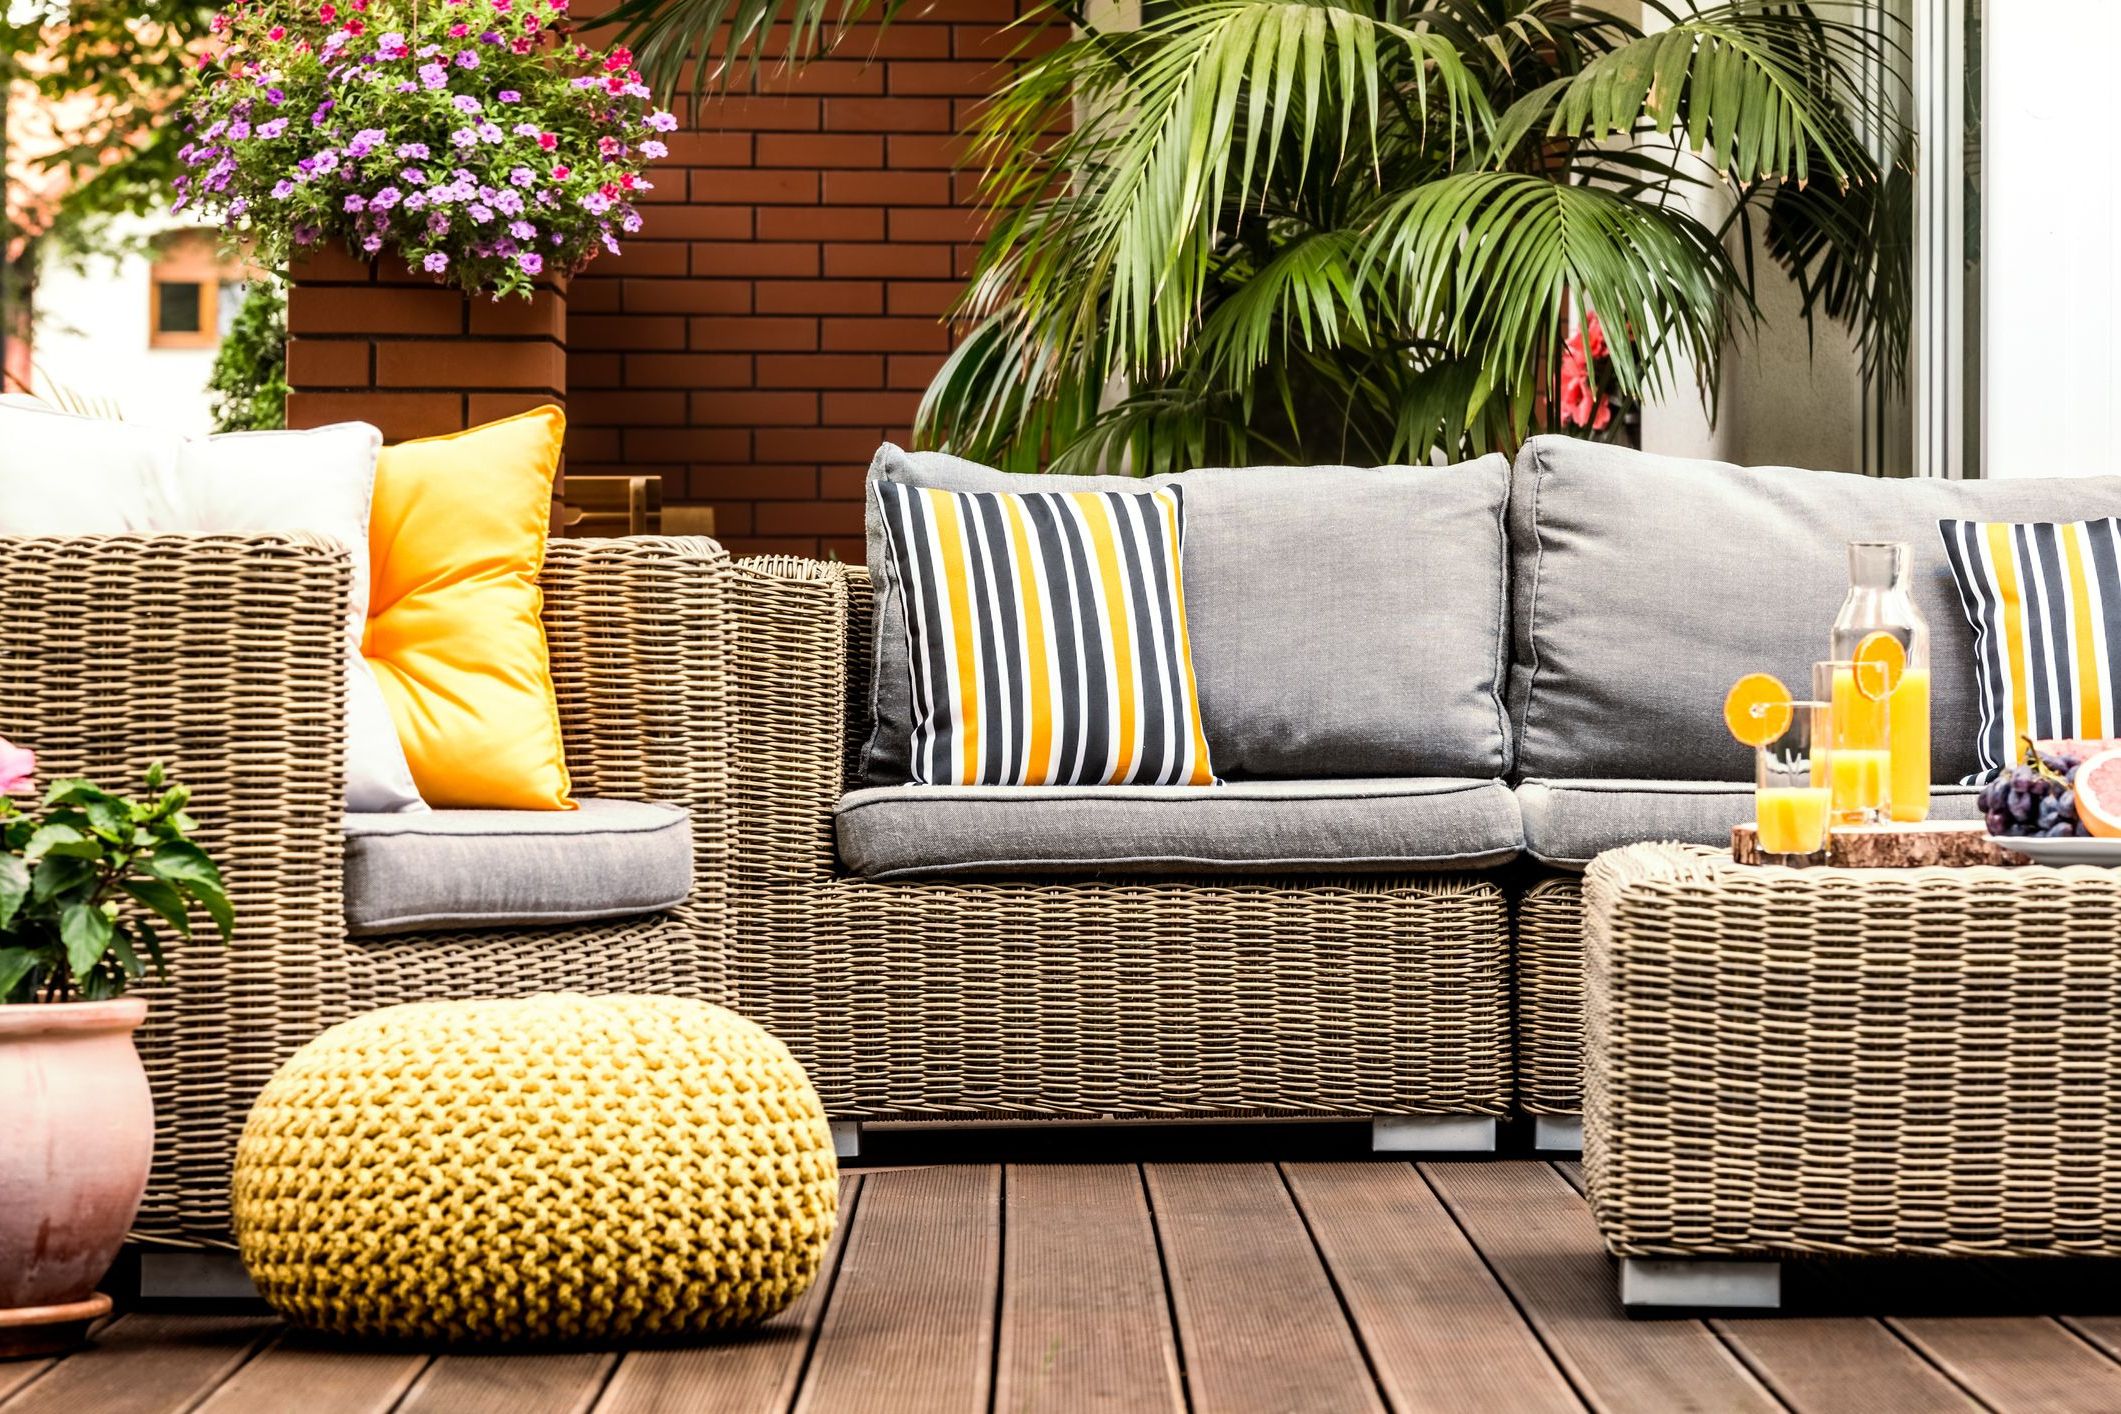 Latest 14 Outdoor Cushions To Spruce Up Your Garden Furniture Inside Balcony And Deck With Soft Cushions (View 10 of 15)